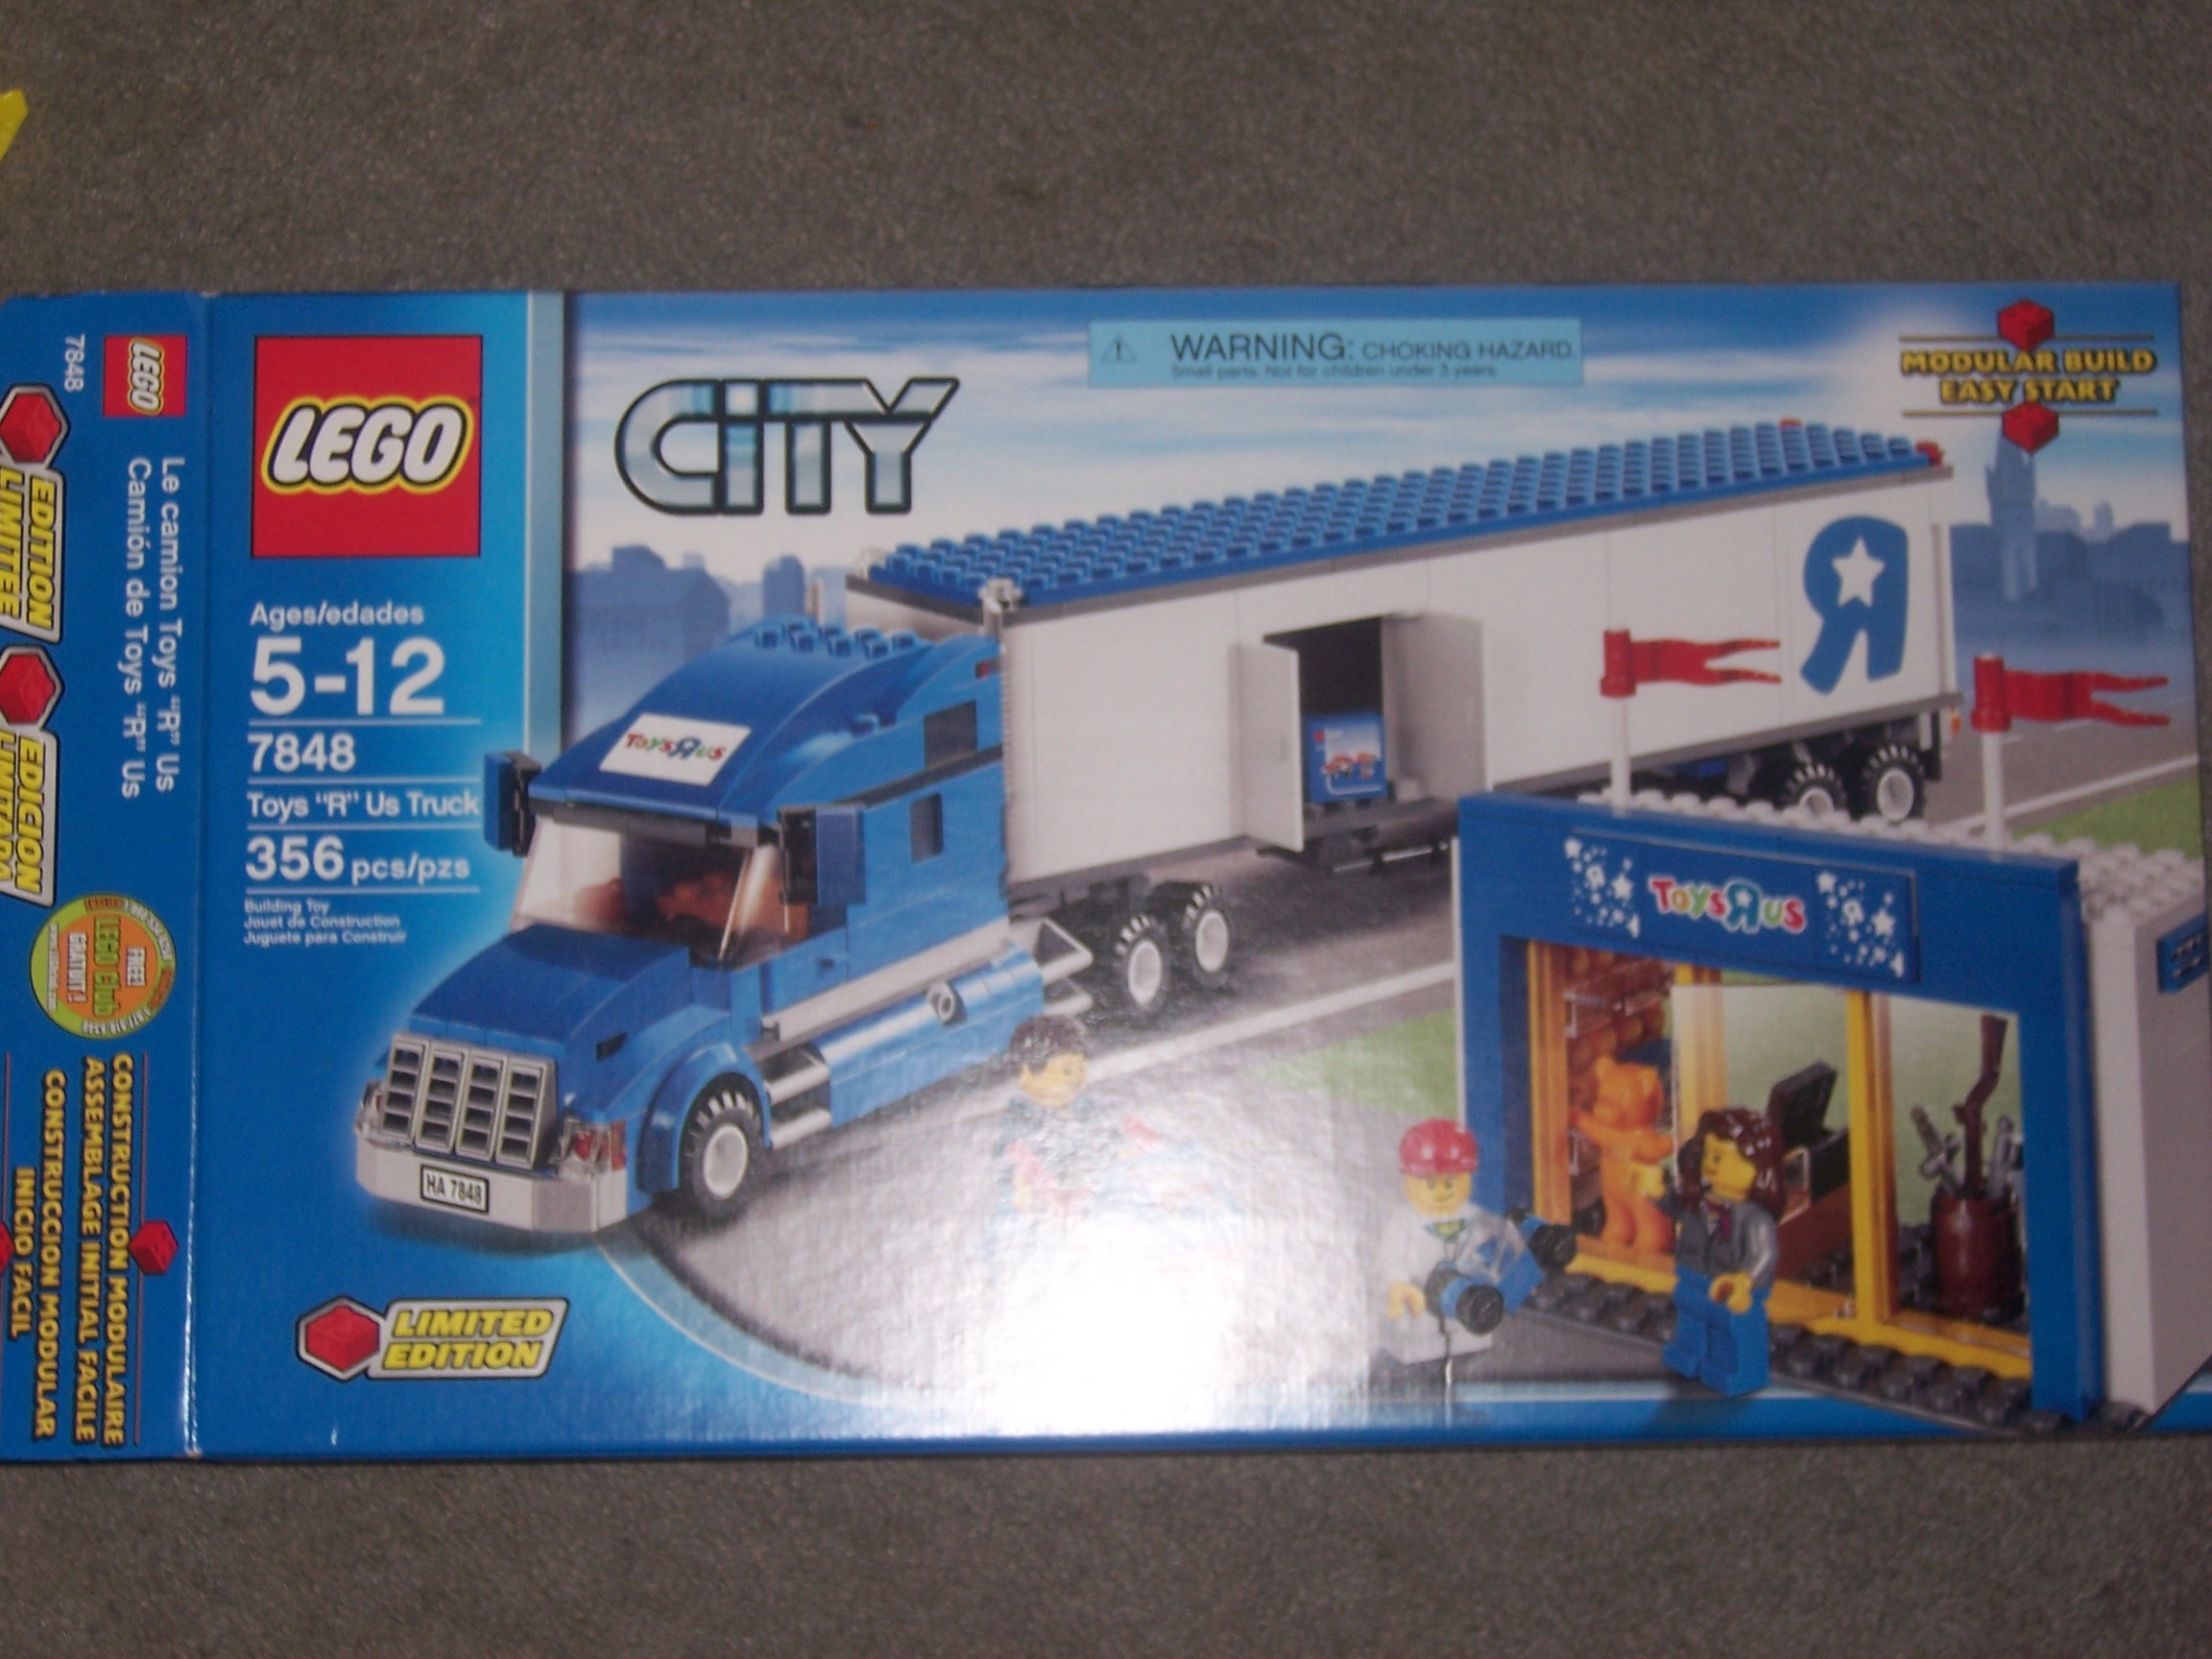 Lego City Toys R Delivery Truck | My of galaxy